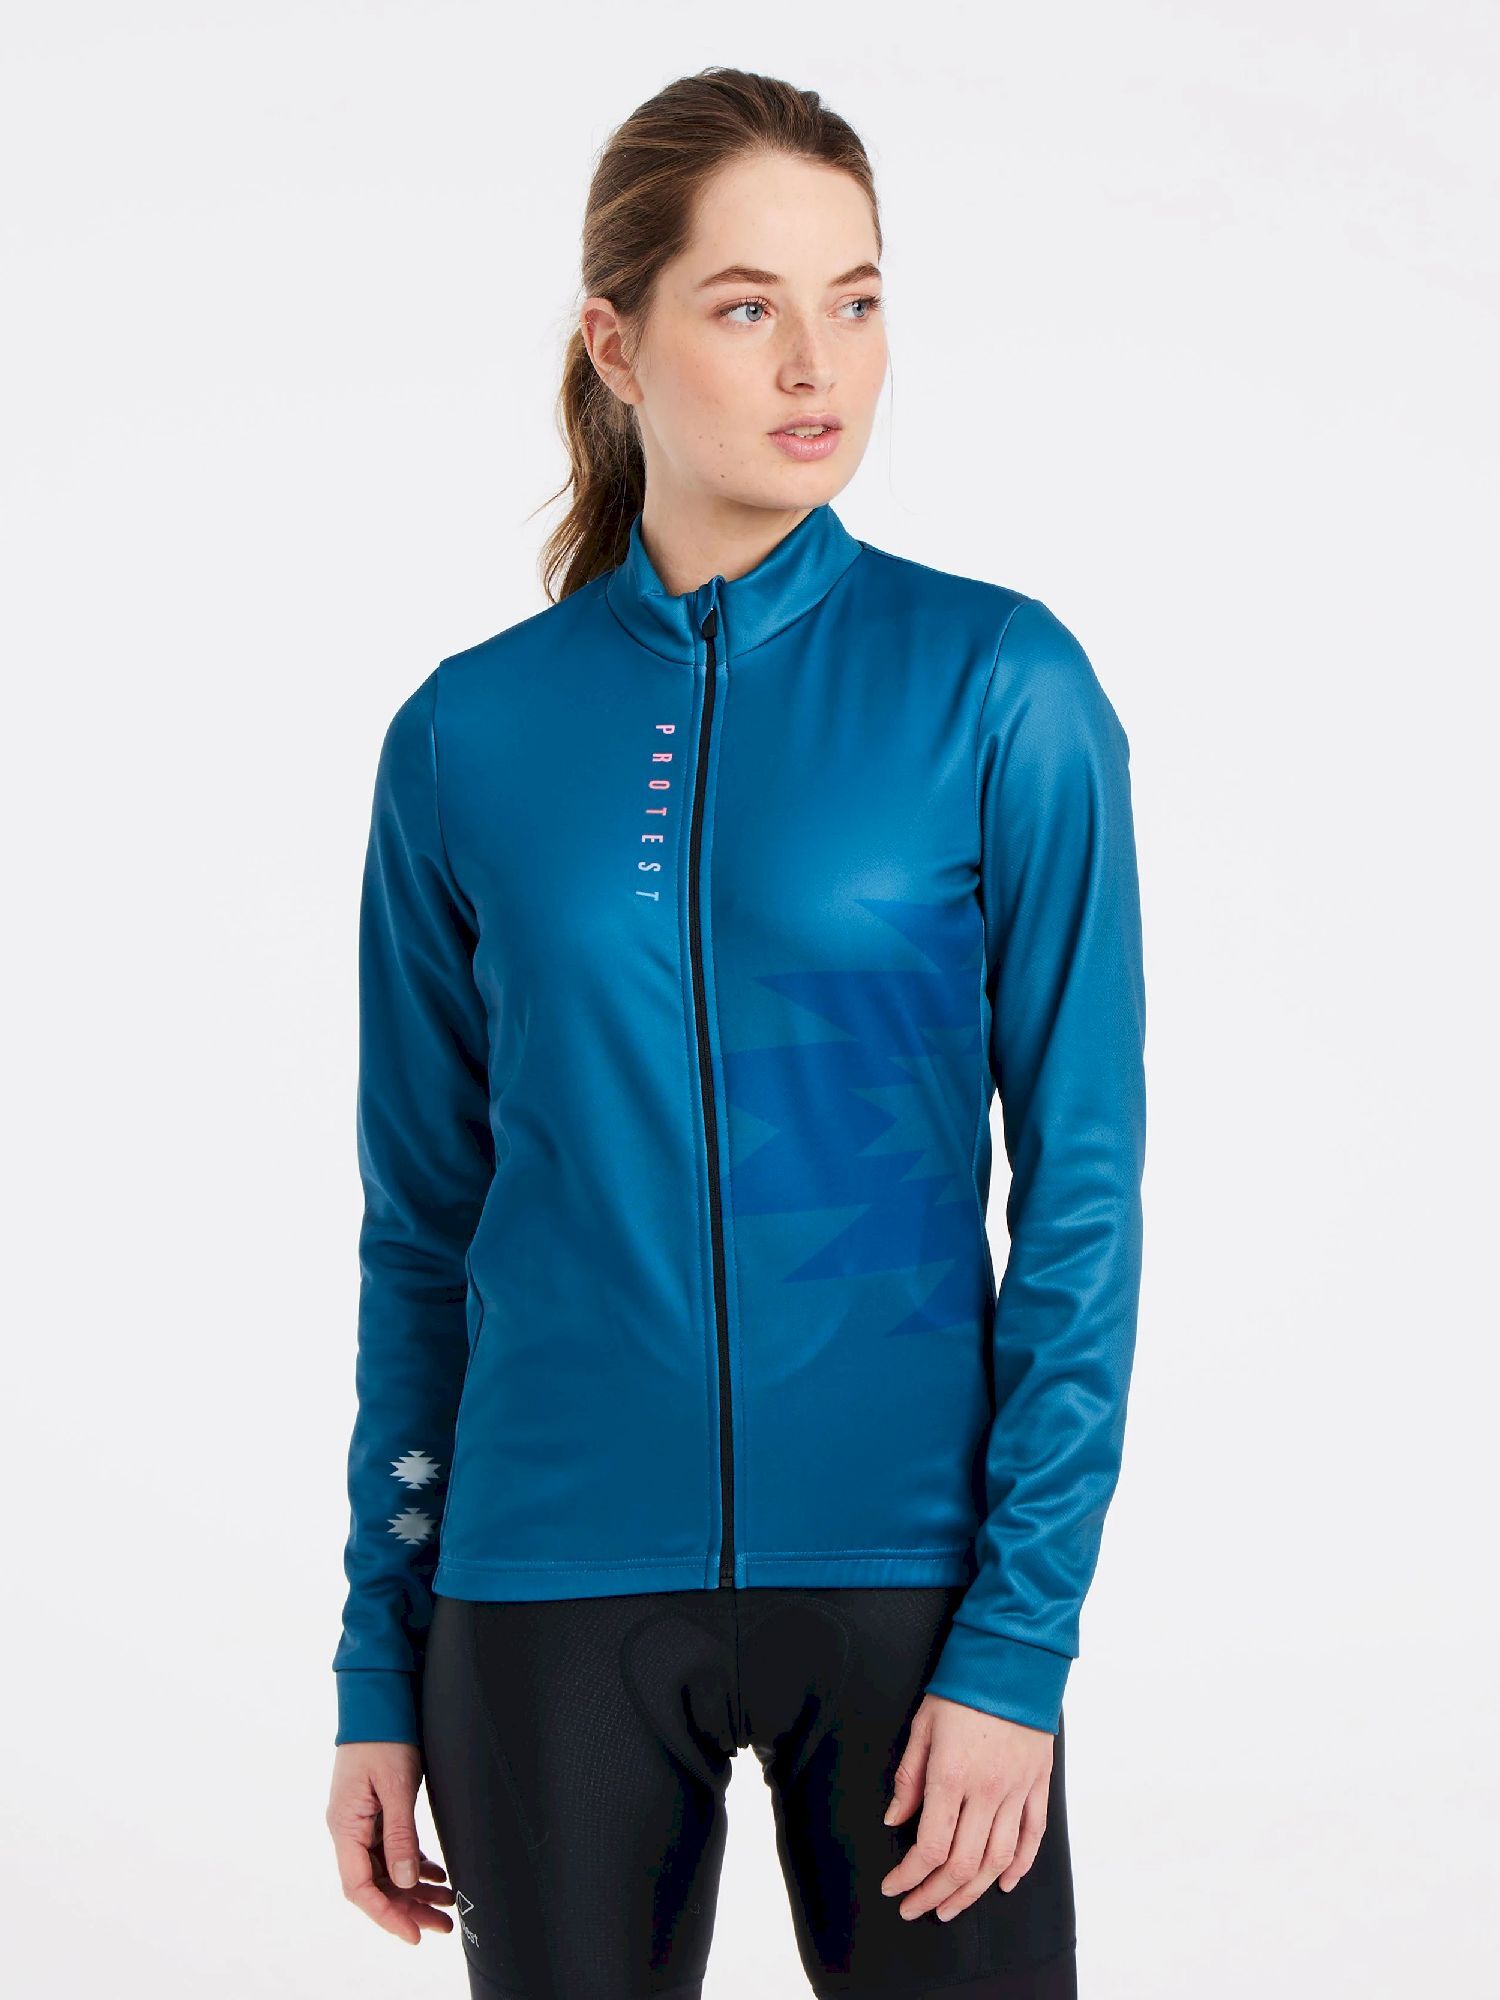 Protest Prtchatel - Cycling jacket - Women's | Hardloop